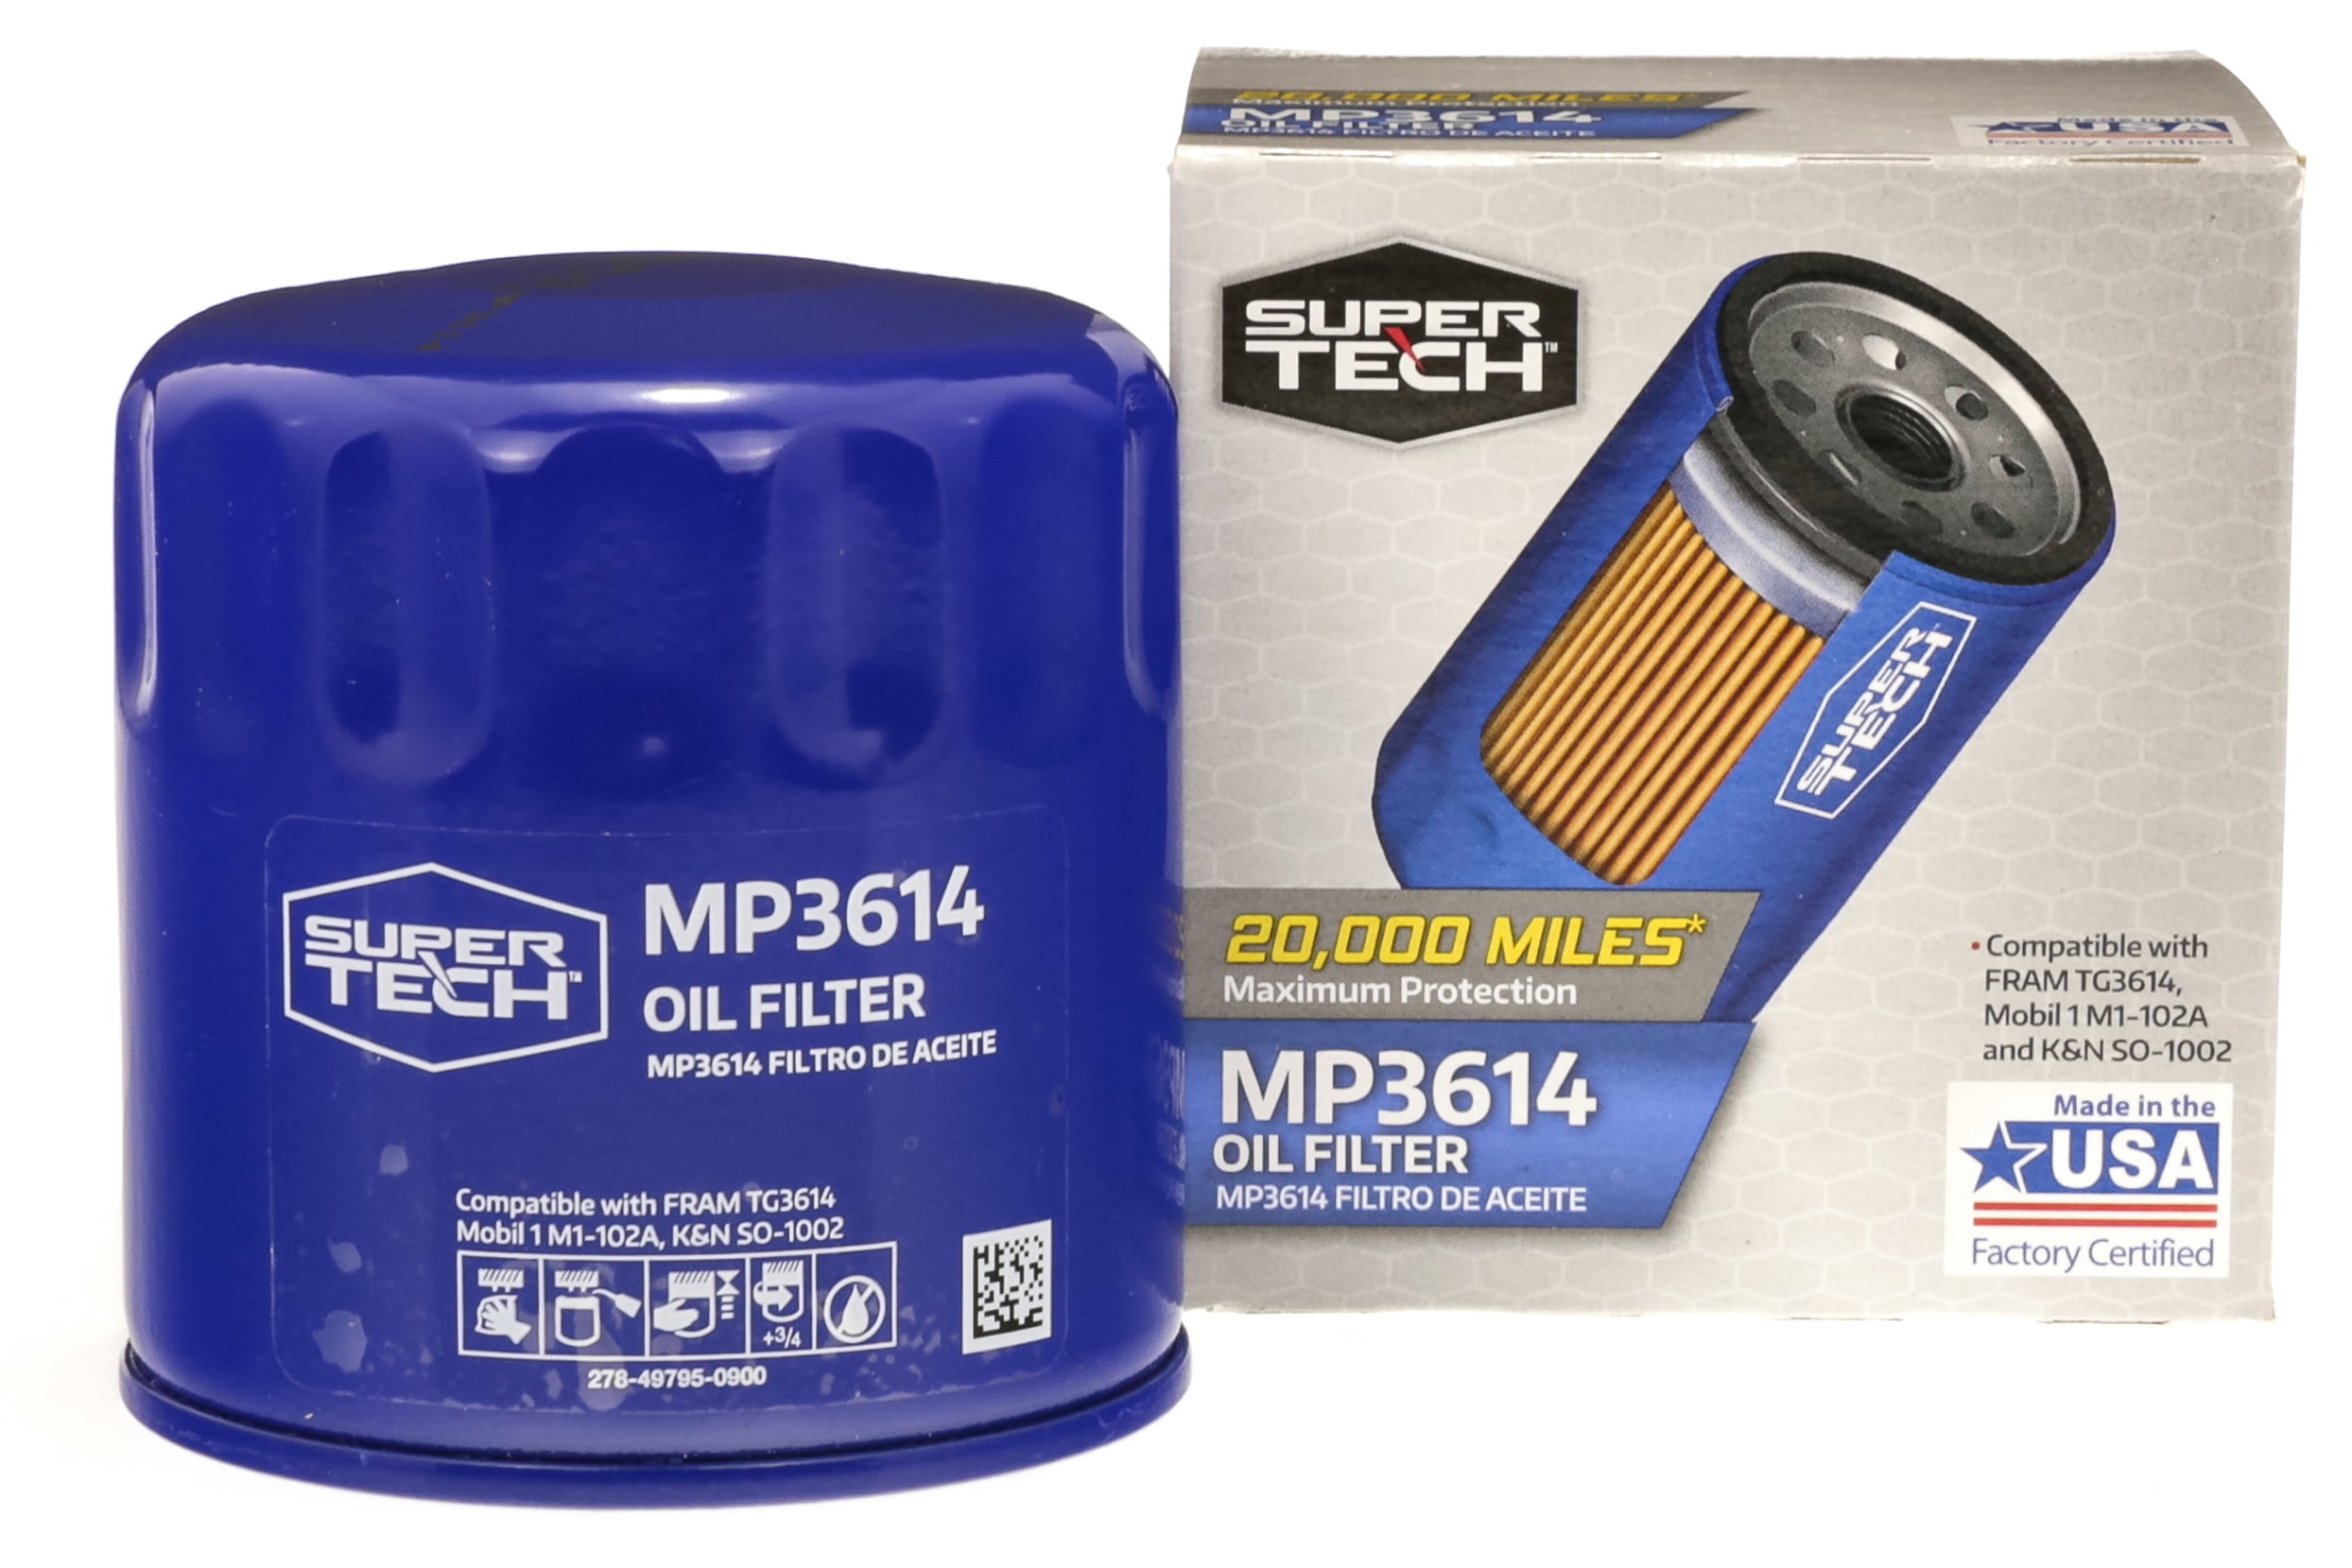 Super Tech SuperTech Maximum Performance 20,000 mile Replacement Synthetic Oil Filter, MP3614, for Chrysler, Dodge, Mazda, and Ford